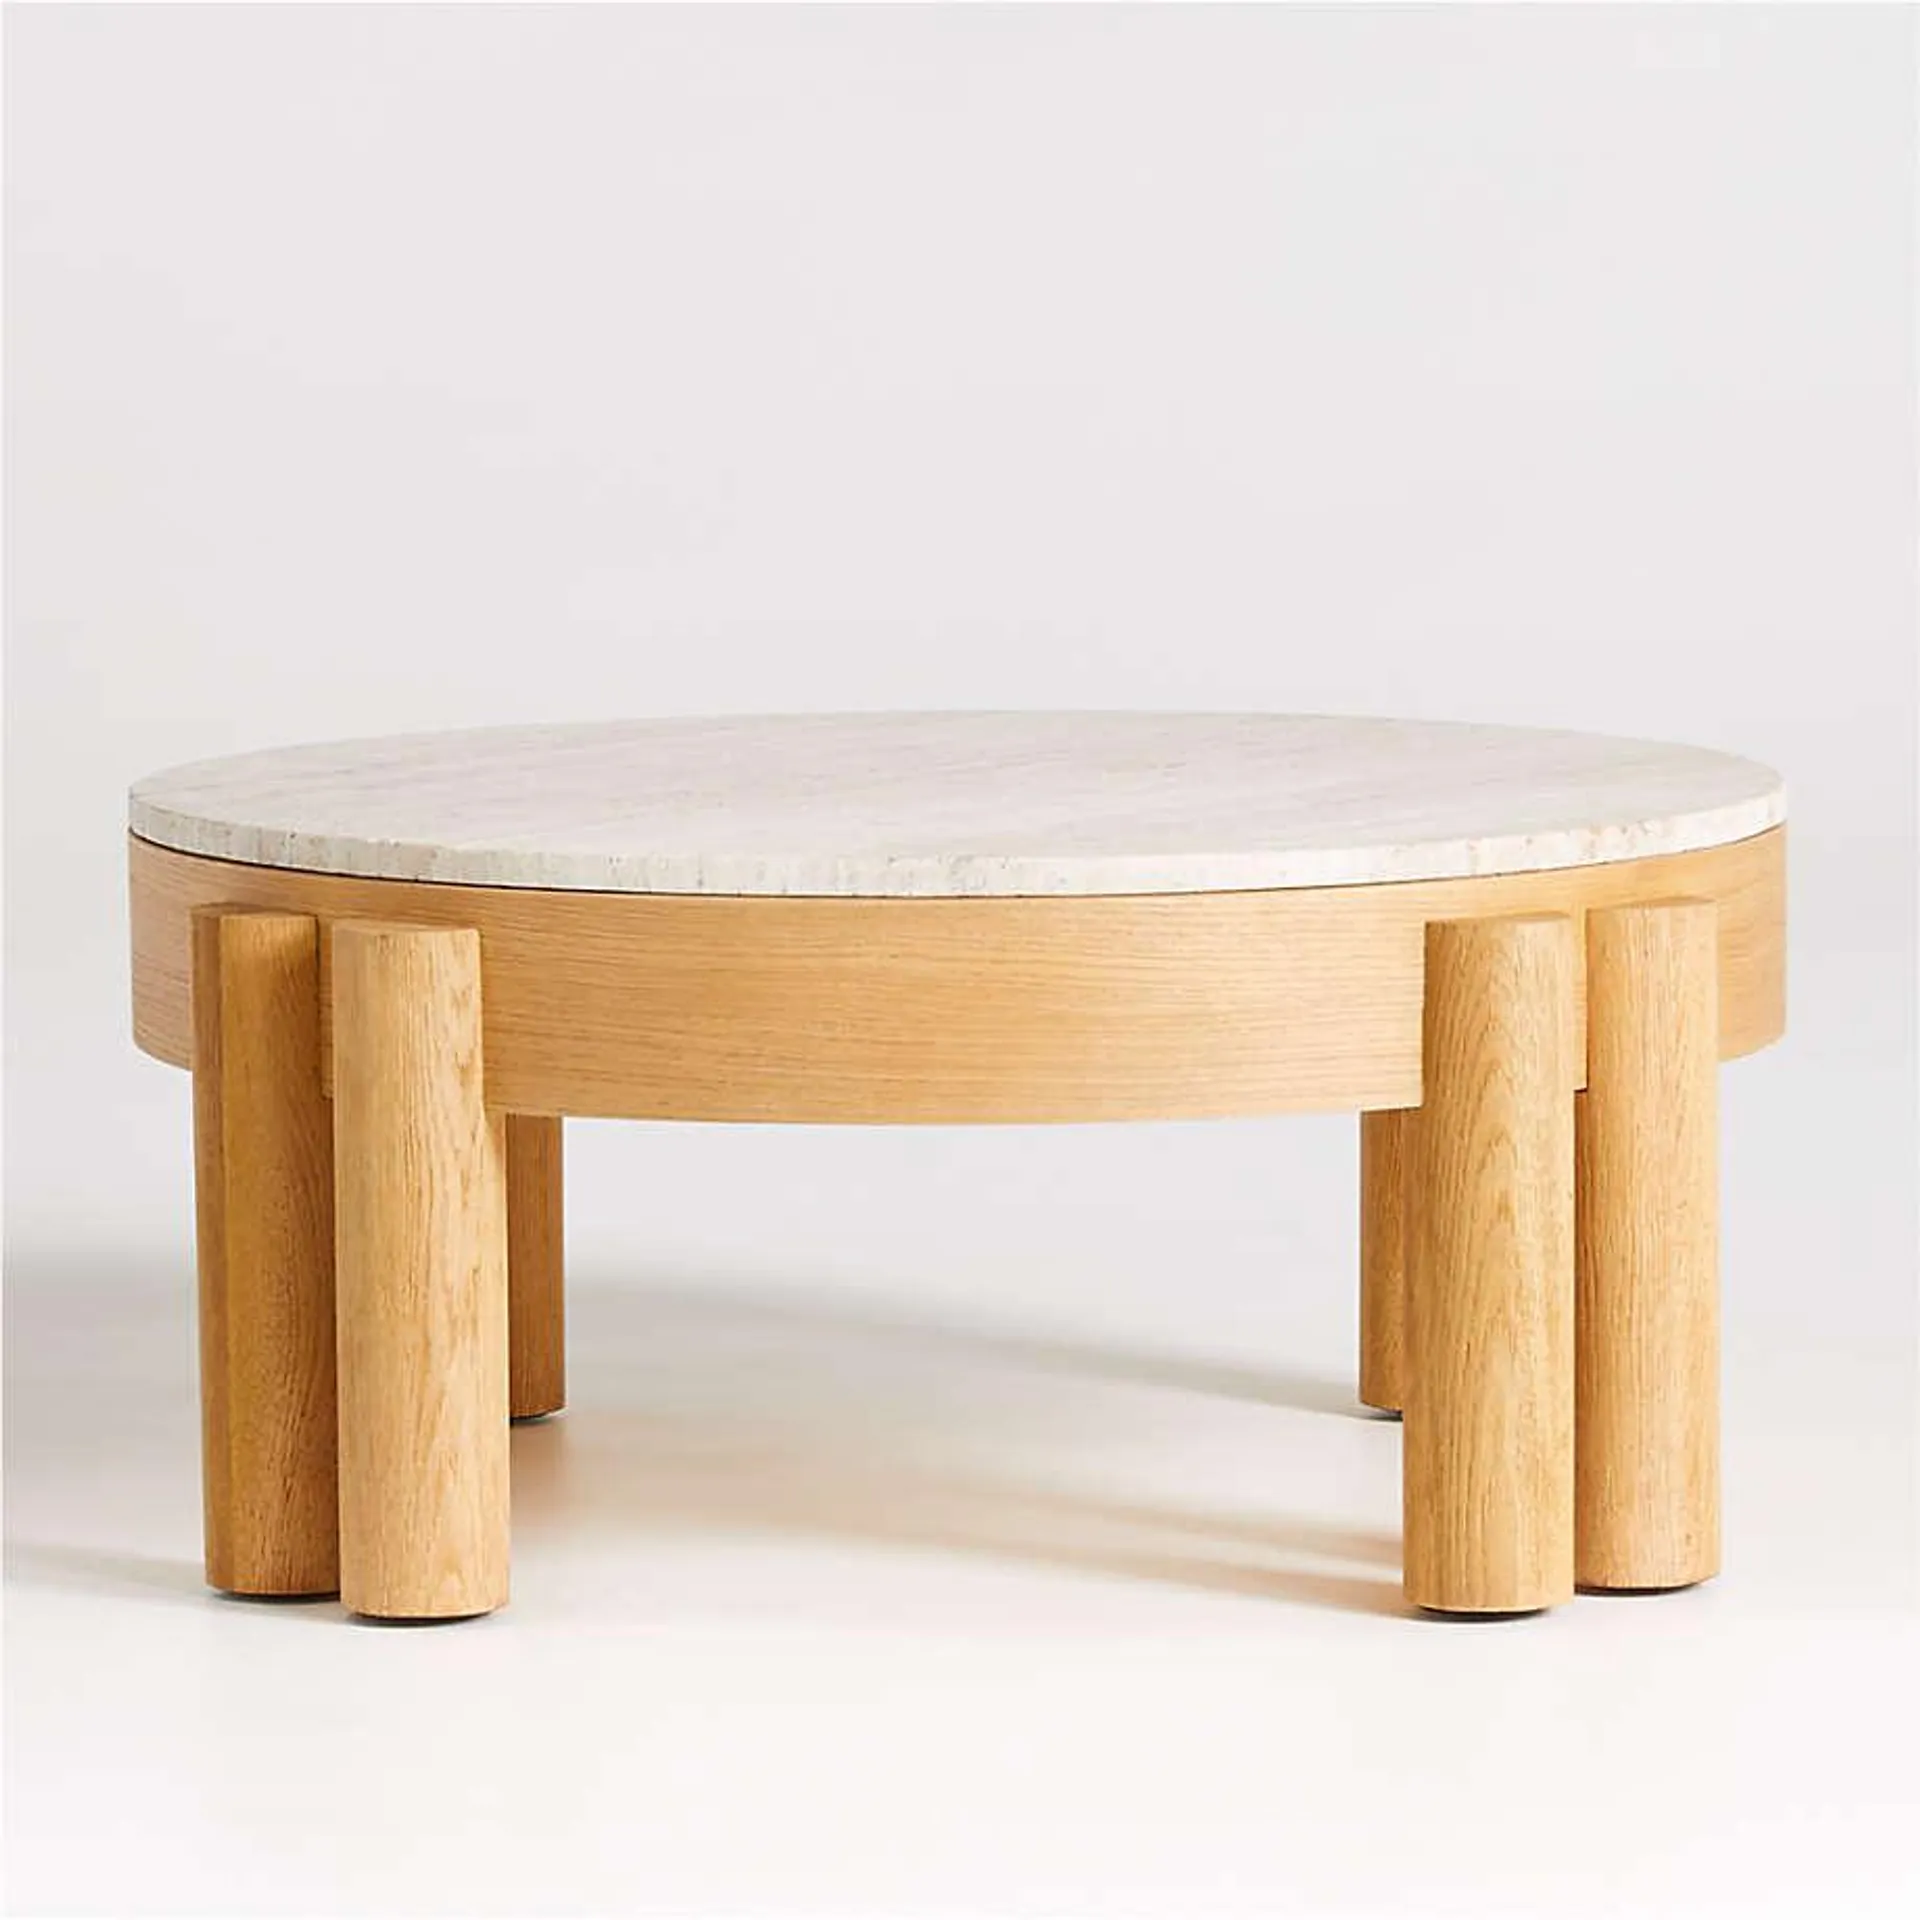 Oasis Round Wood Coffee Table